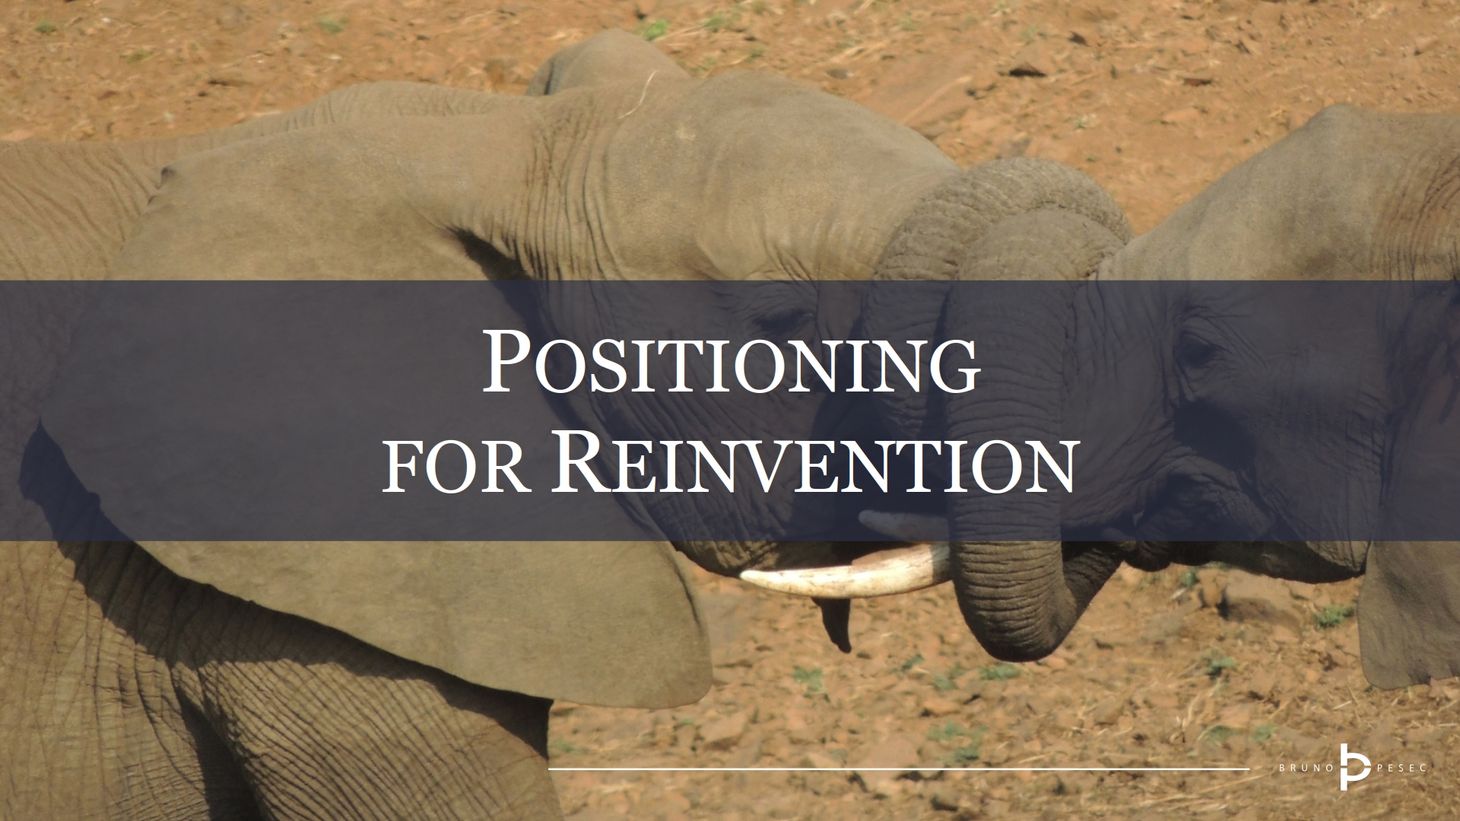 Positioning for reinvention